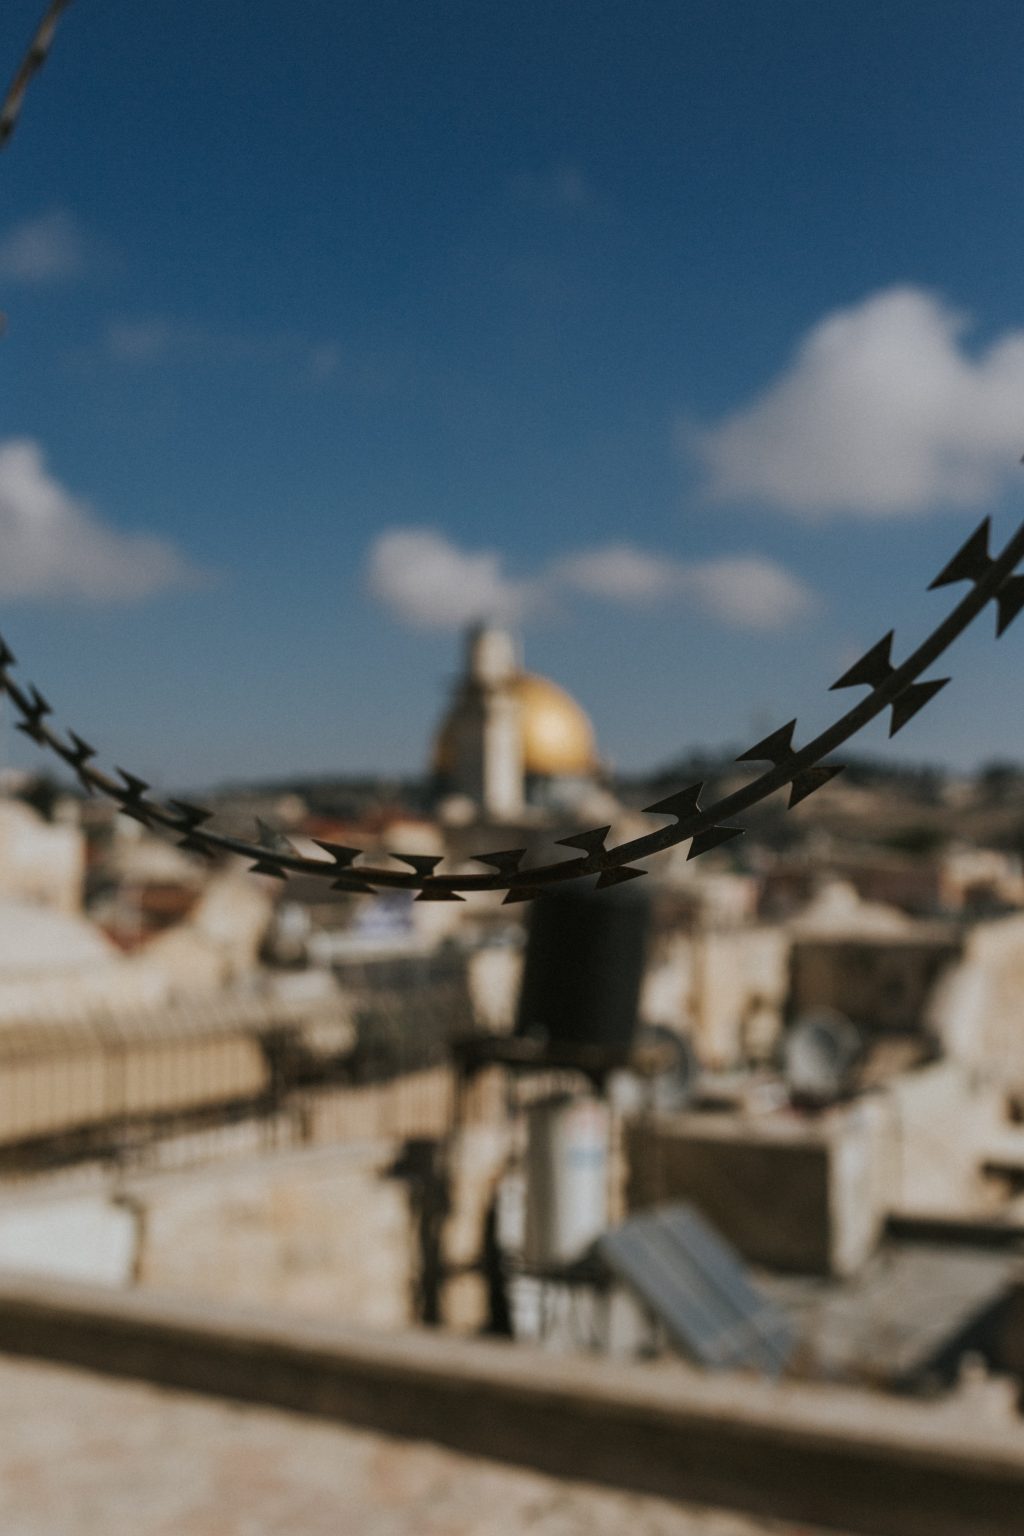 A photo of barbed wire fencing in Israel